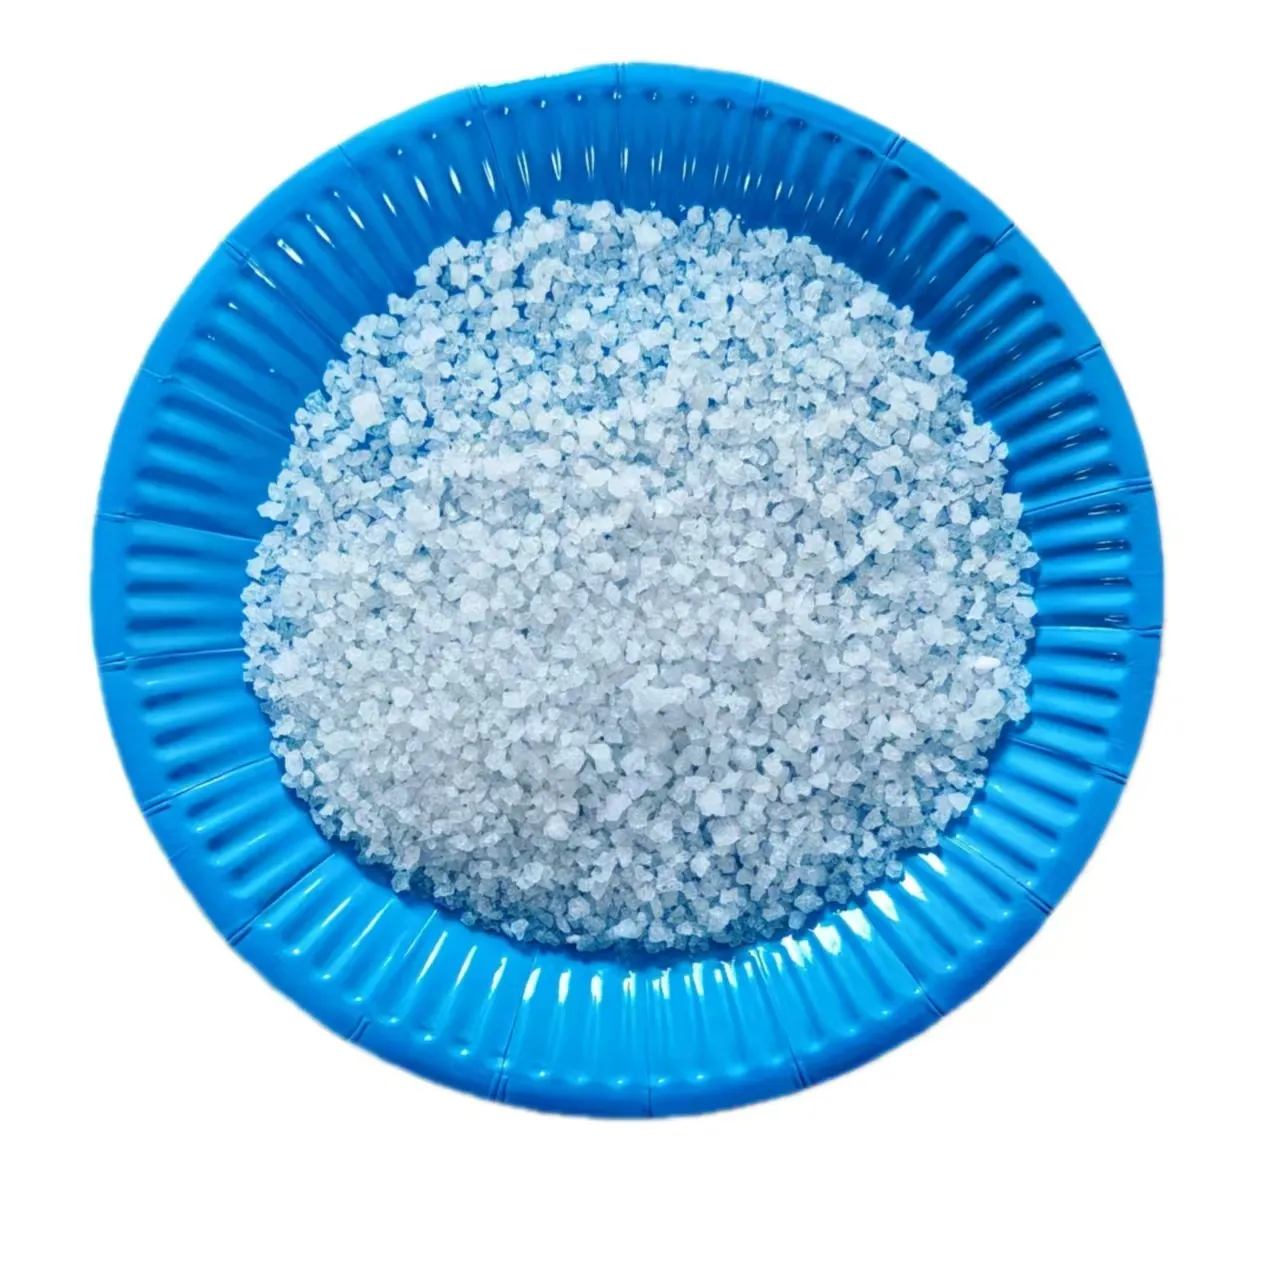 Super Absorbent Polymer Agricultural Bulk Potassium Polyacrylate Water Retaining Gel Hydrogel Soil Granules For Agriculture Use